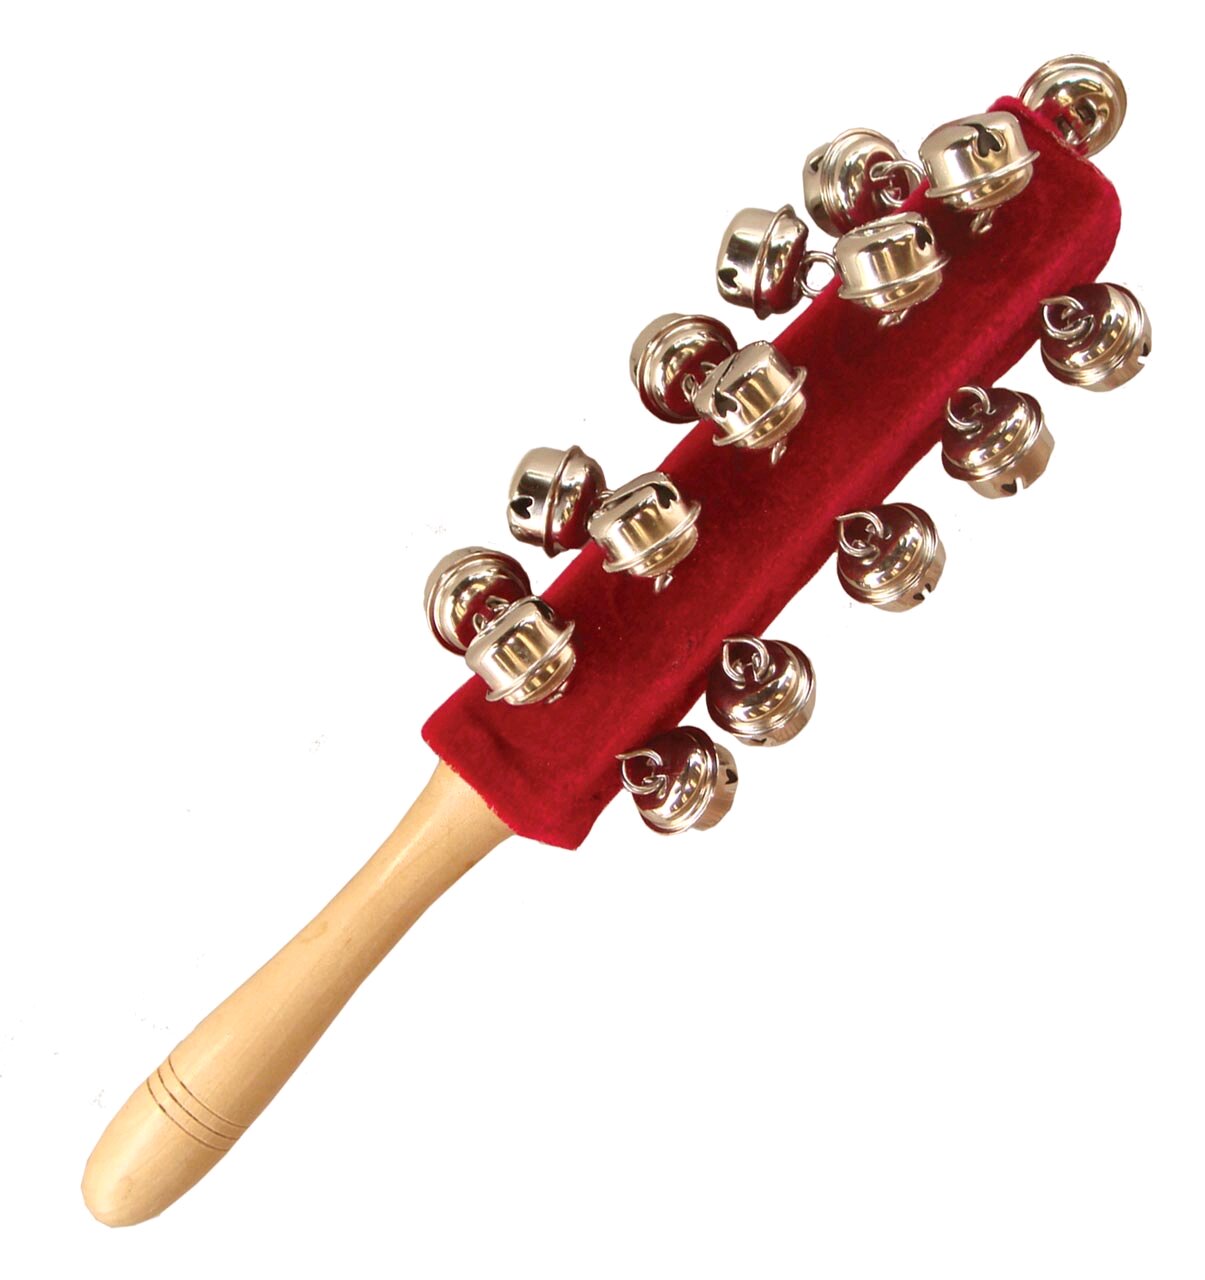 Terre Bell stick with 21 bells L = 26cm, wood (38440612) : photo 1